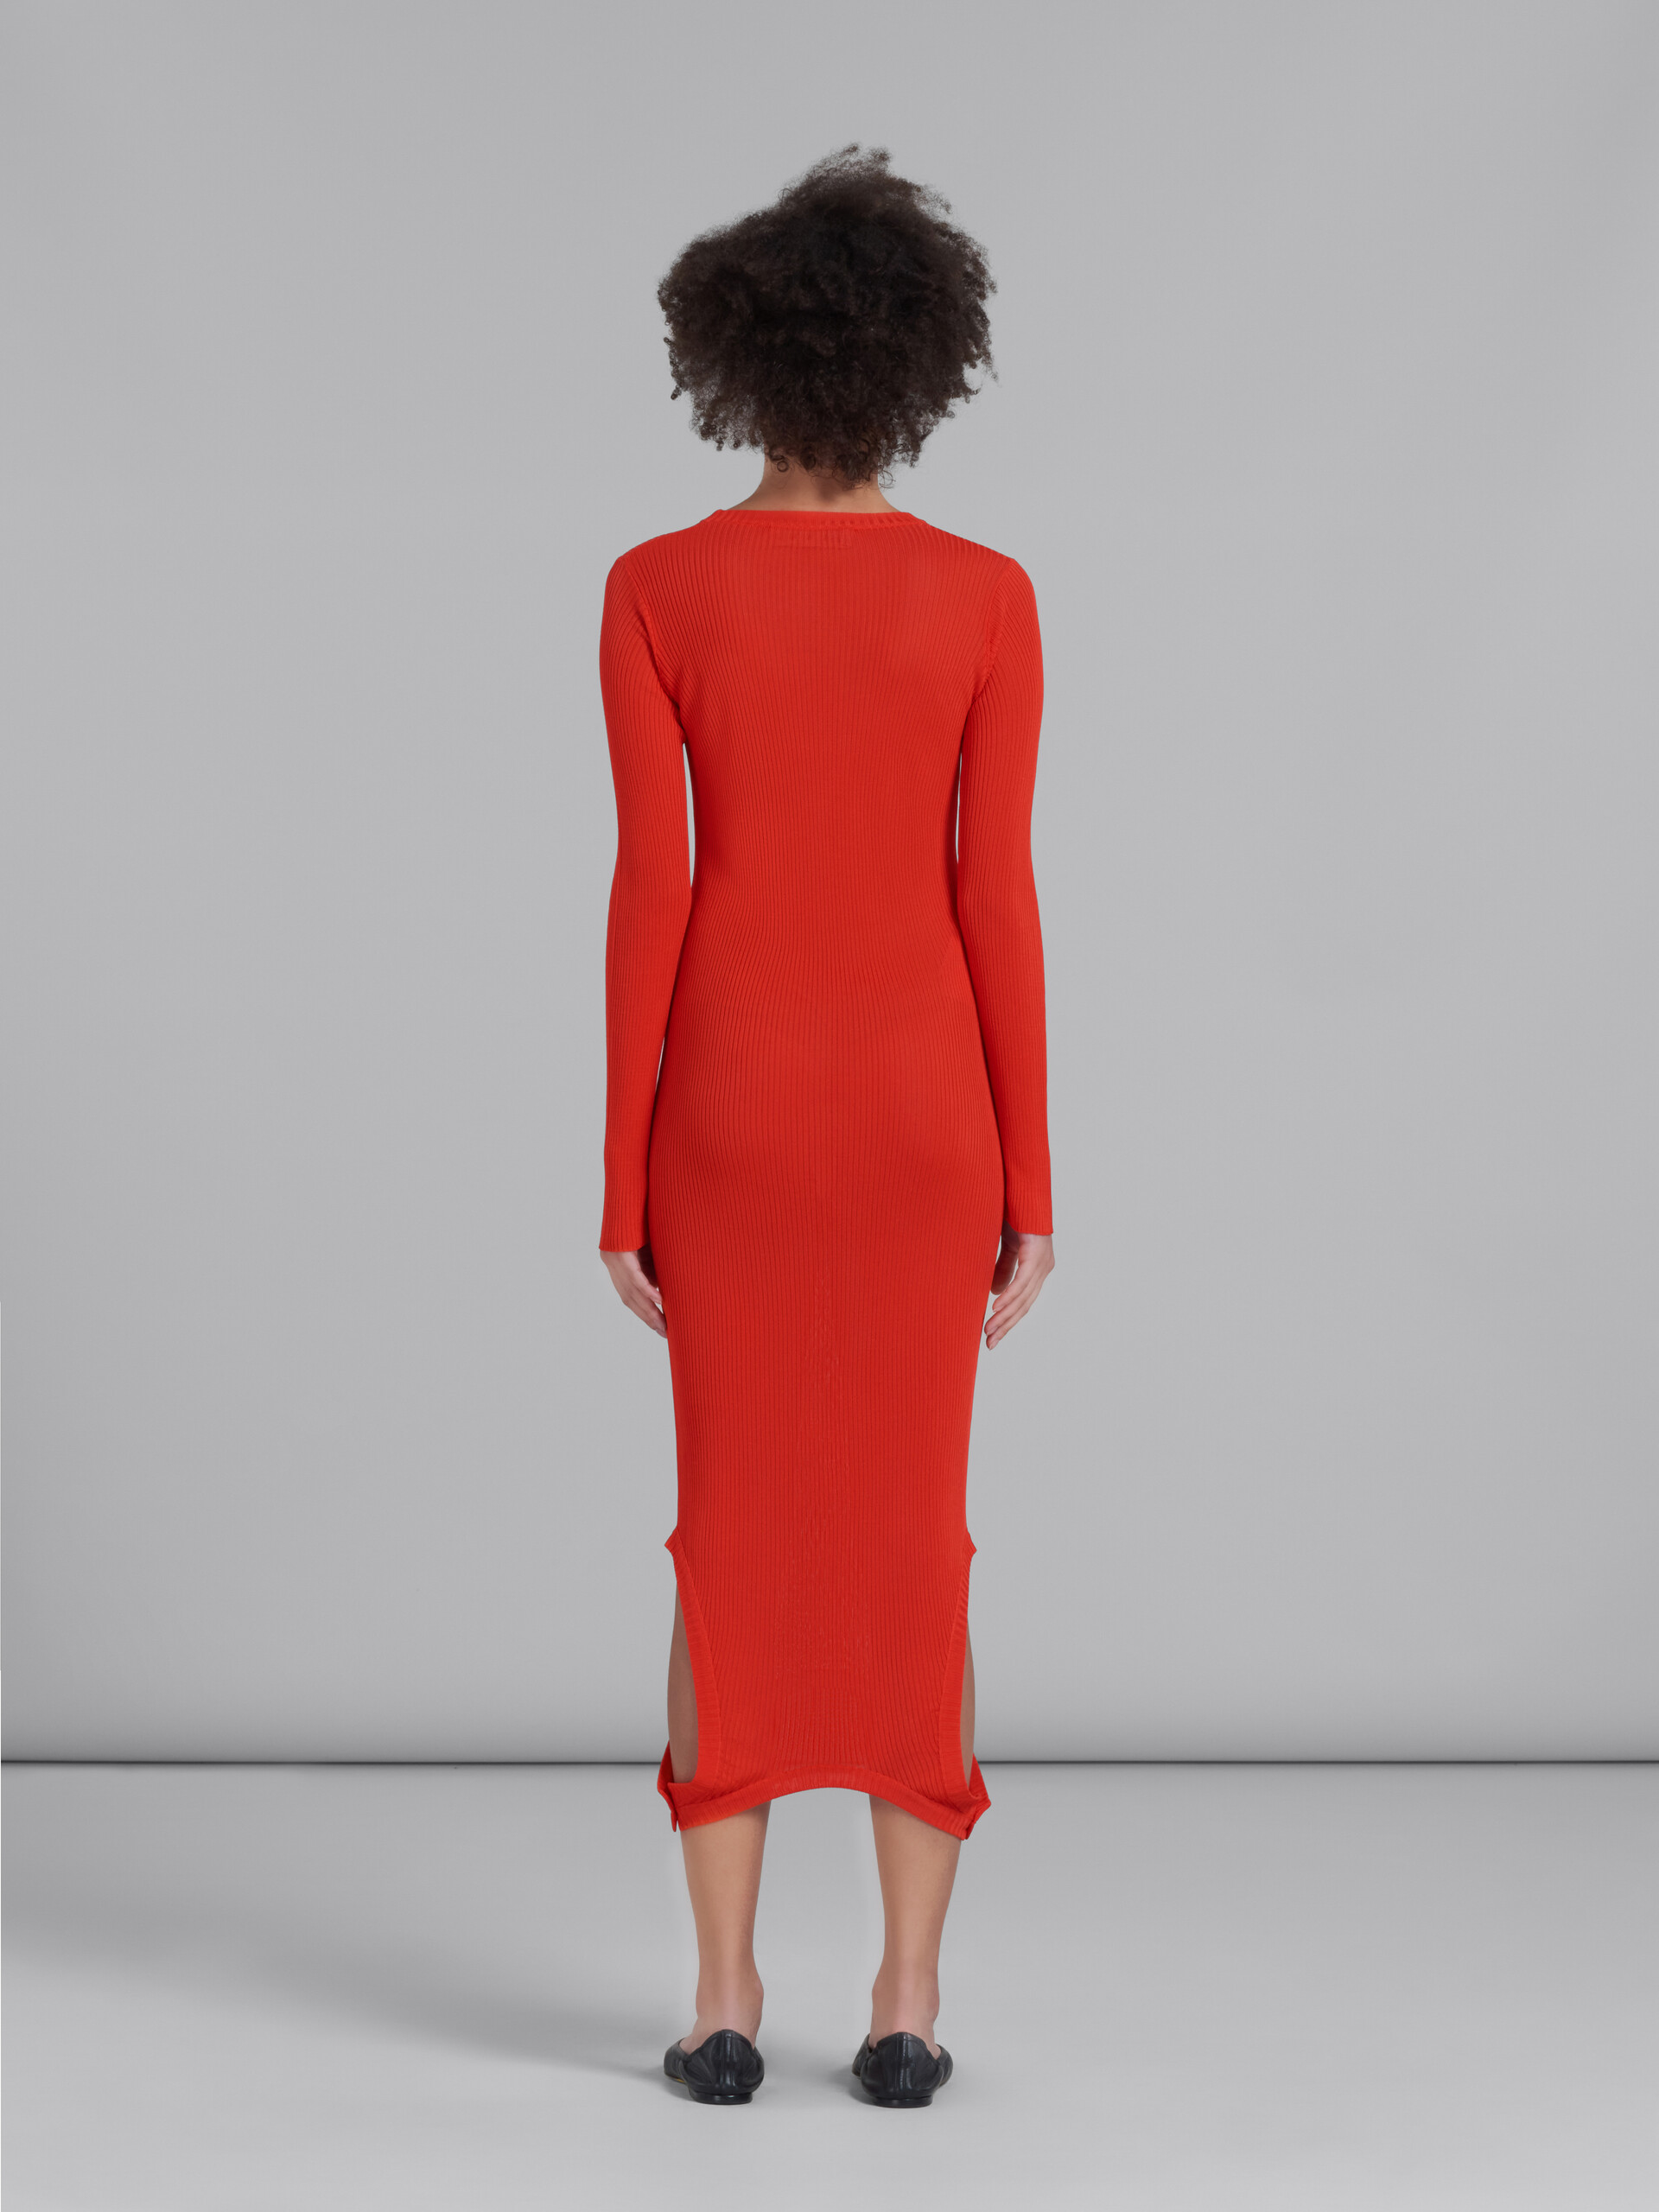 Red ribbed dress with press buttons - Pullovers - Image 3